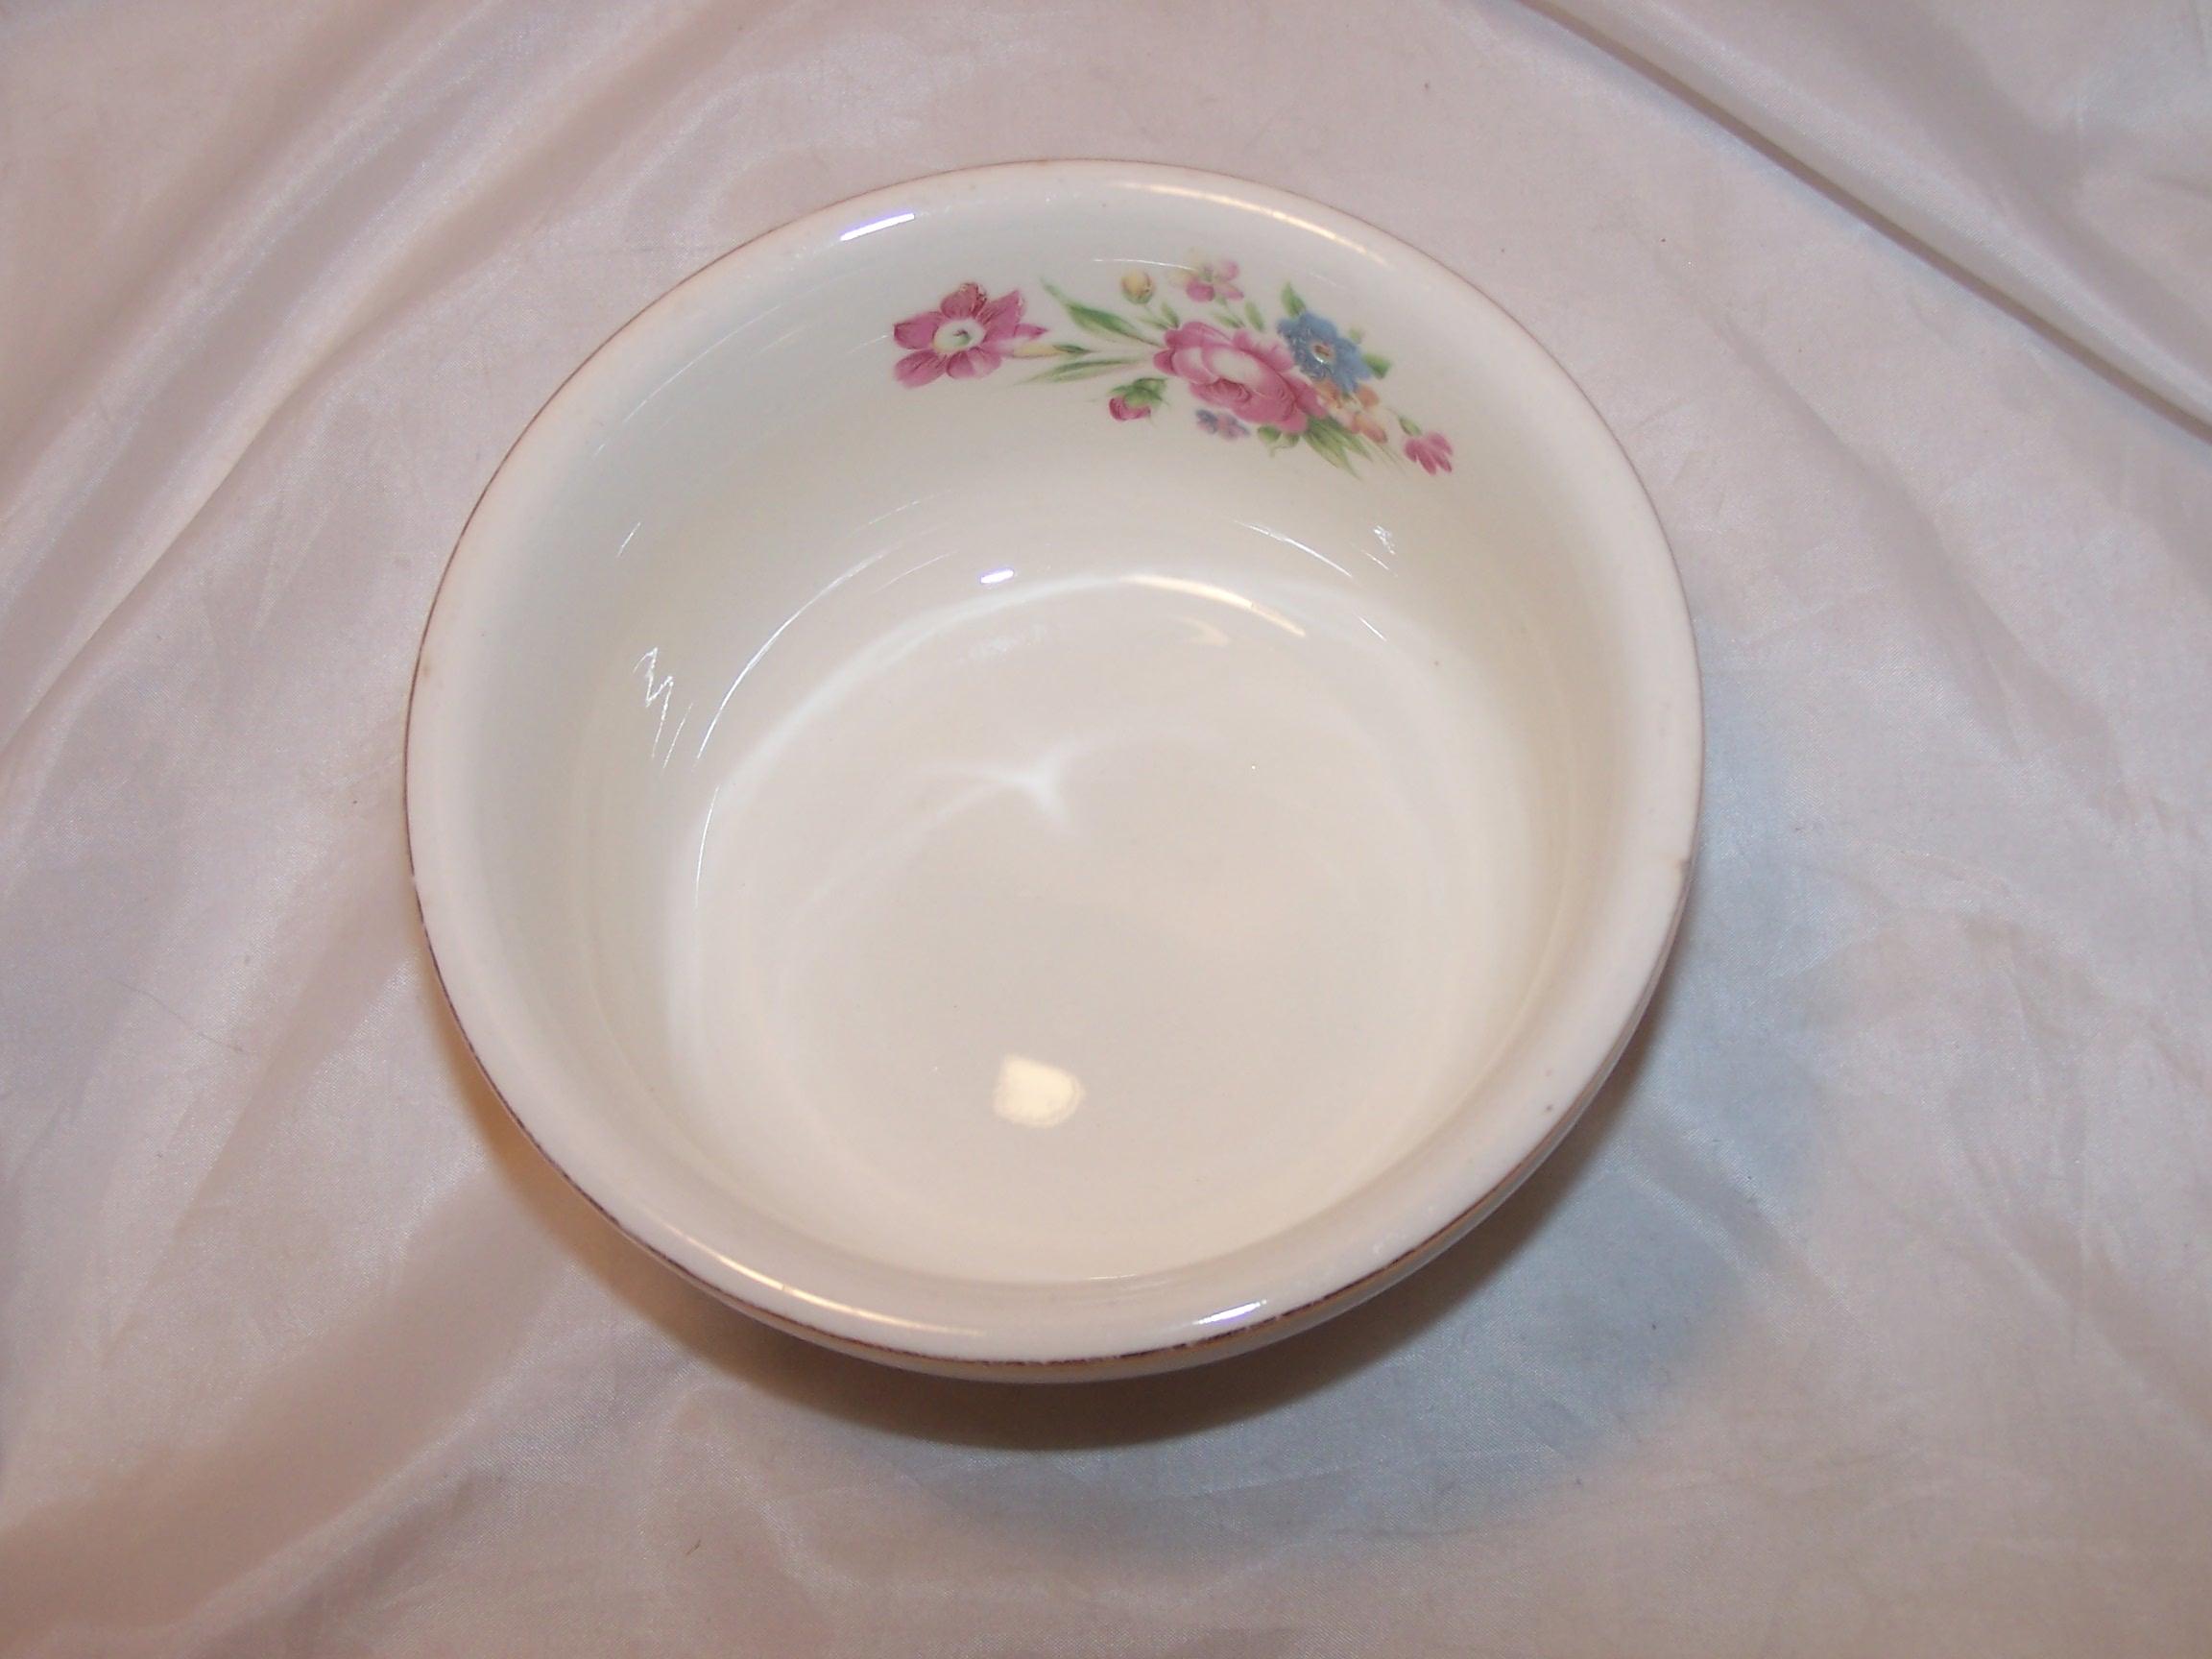 Image 2 of Stetson Mixing Bowl, Gold and Floral Pattern, Ovenware